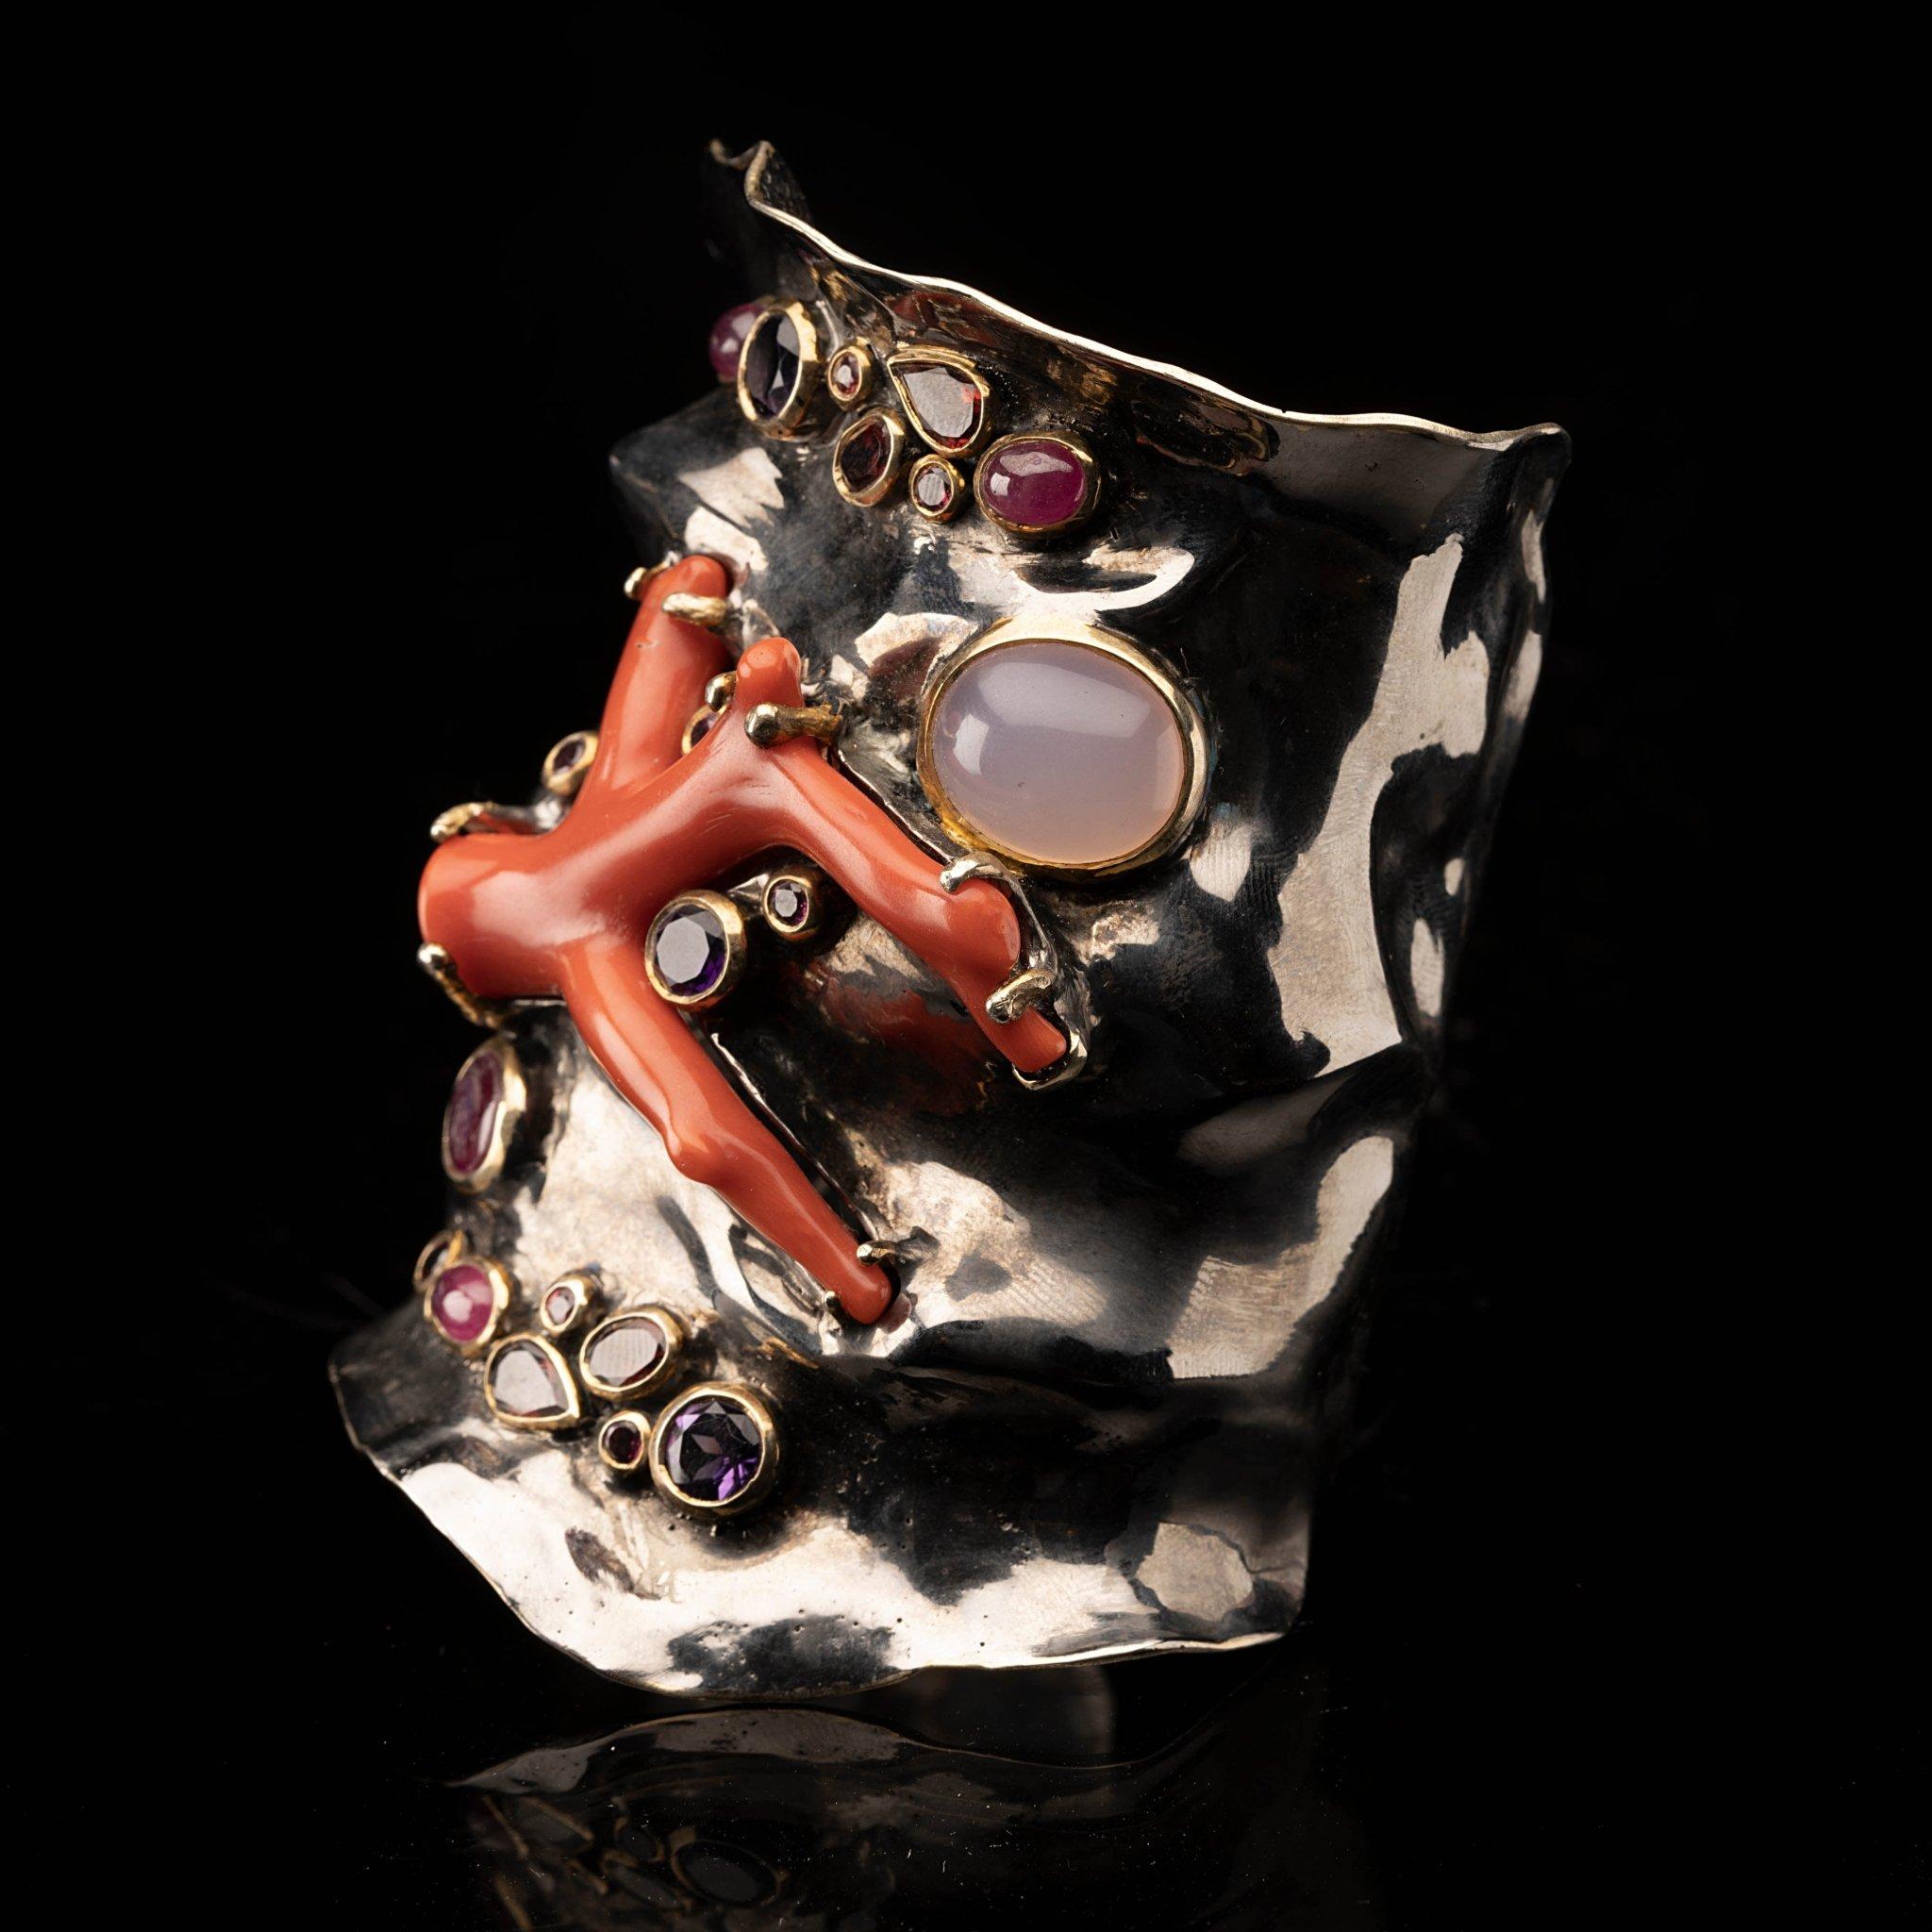 This showstopping number features a red coral branch set centrally in a rhodium plated sterling silver adjustable cuff bracelet set off by a round rose quartz cabochon along with sparkling garnets, sapphires, rubies, amethysts, and 14 karat gold